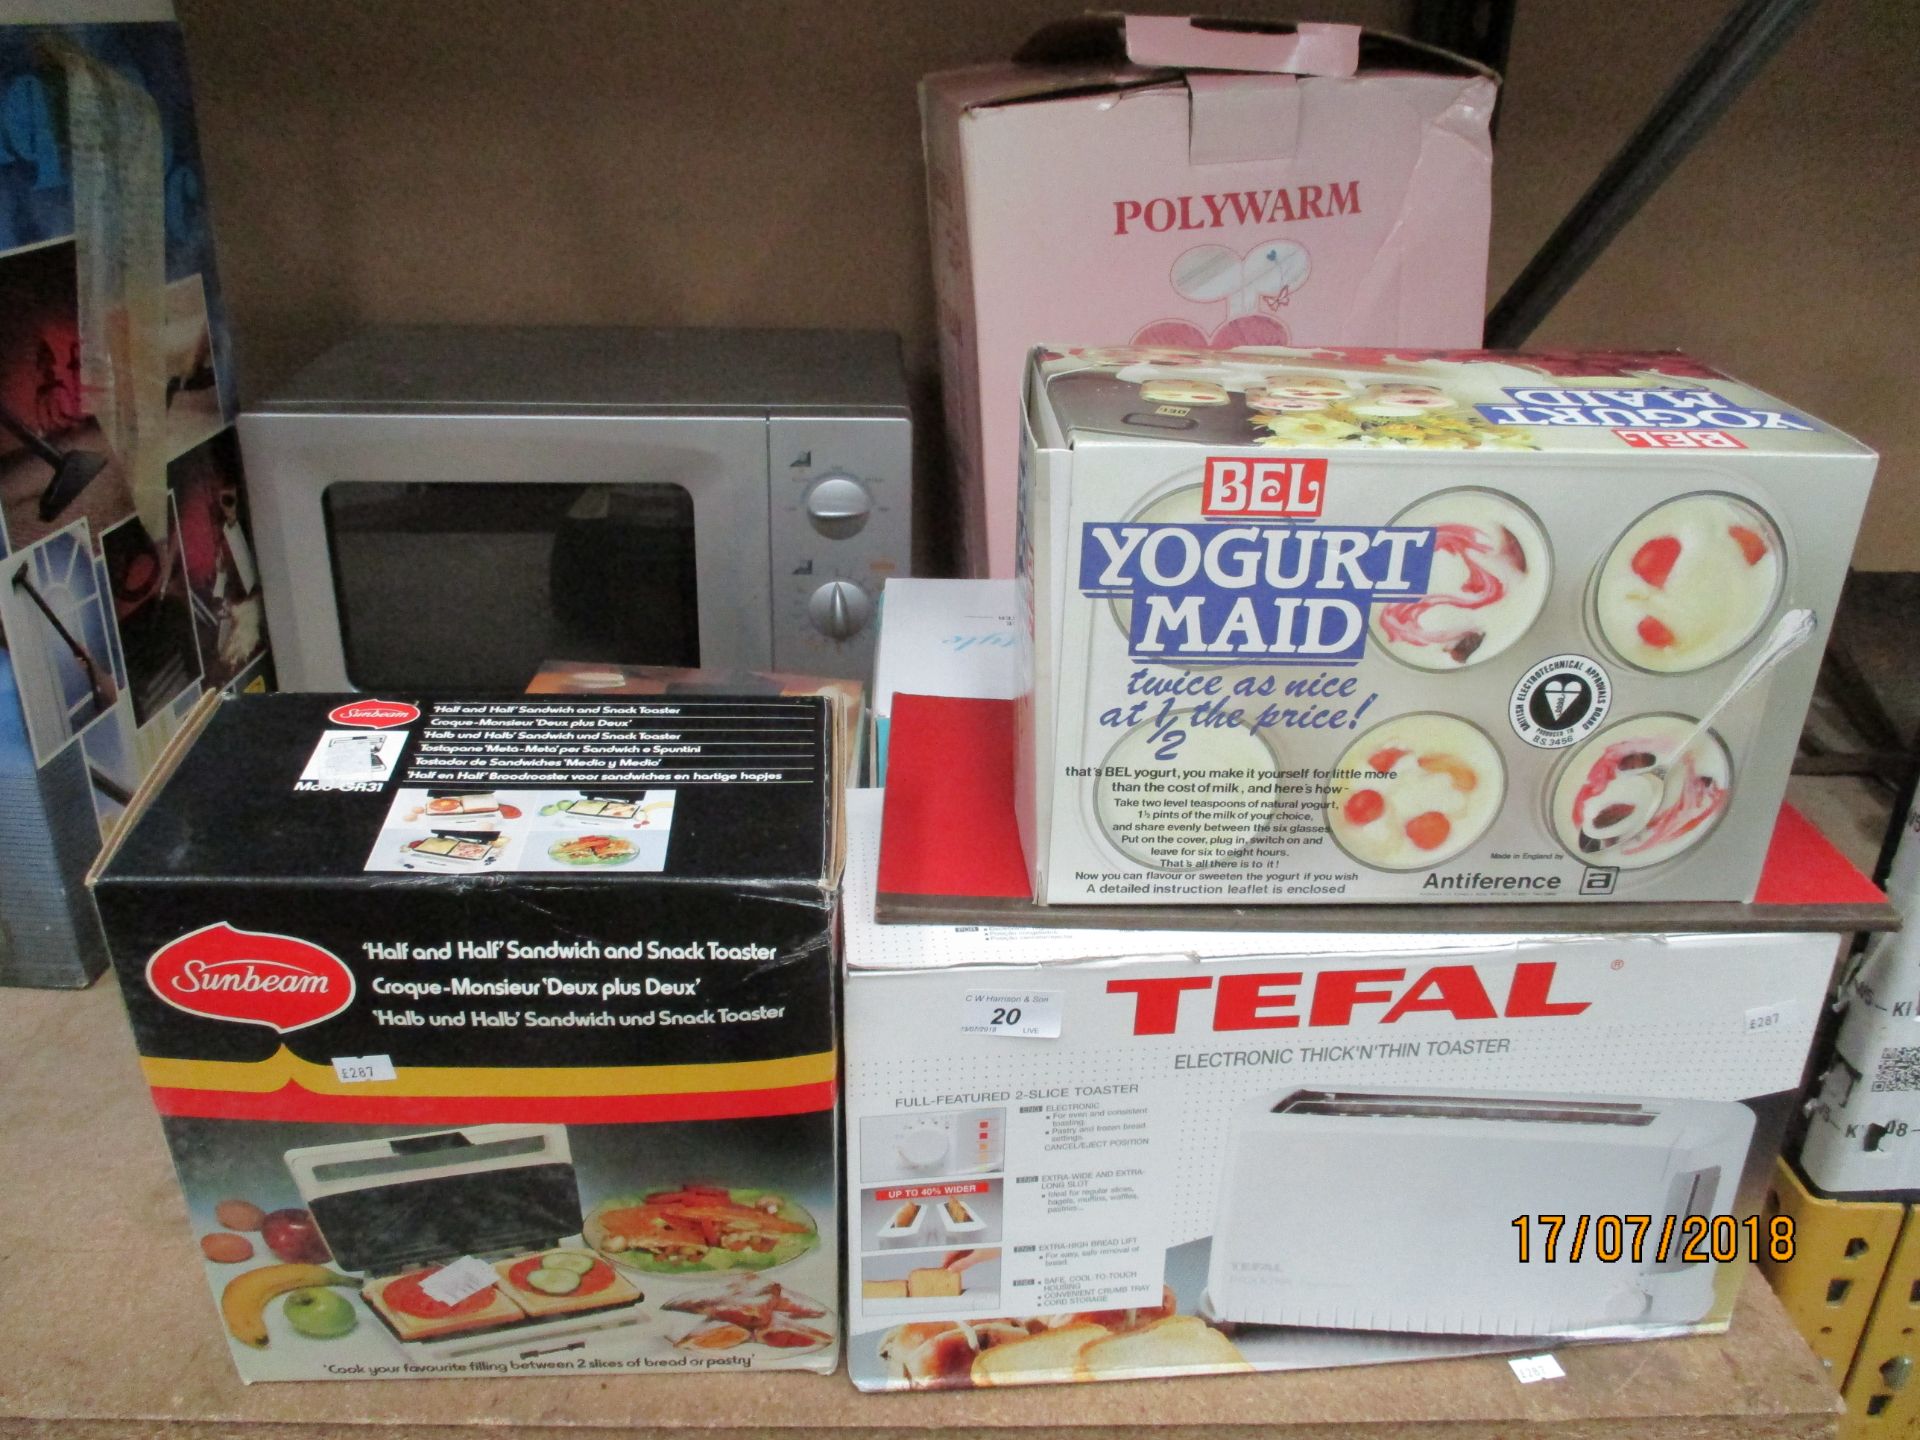 Contents to corner of rack - Matsui microwave oven, Eke kitchen scales, Sunbeam toaster,